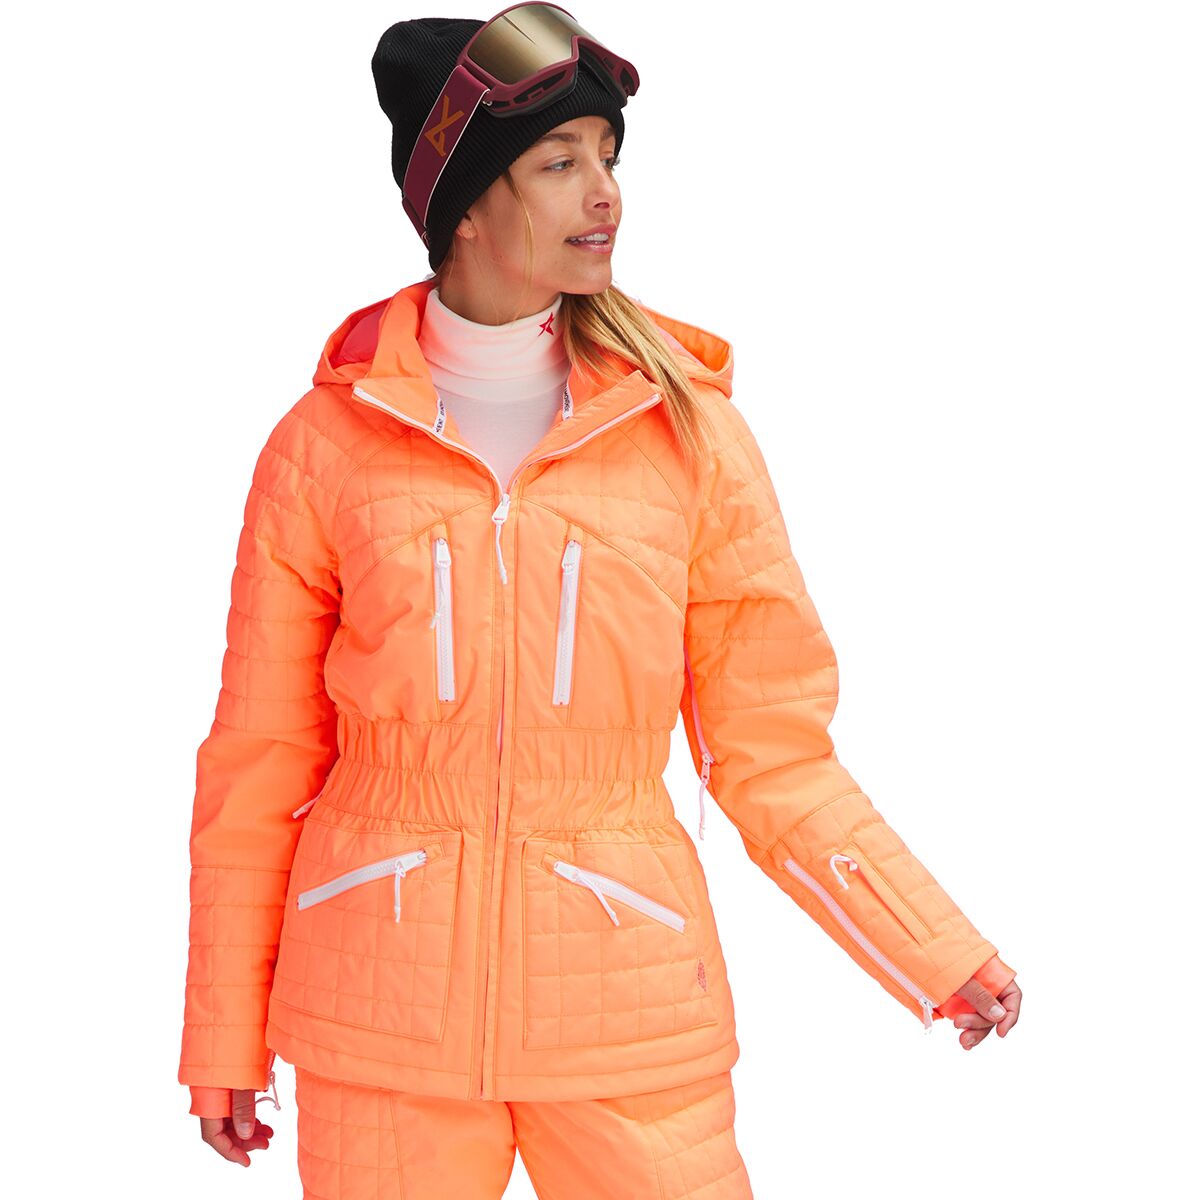 FP Movement All Prepped Ski Jacket - Women's - Clothing